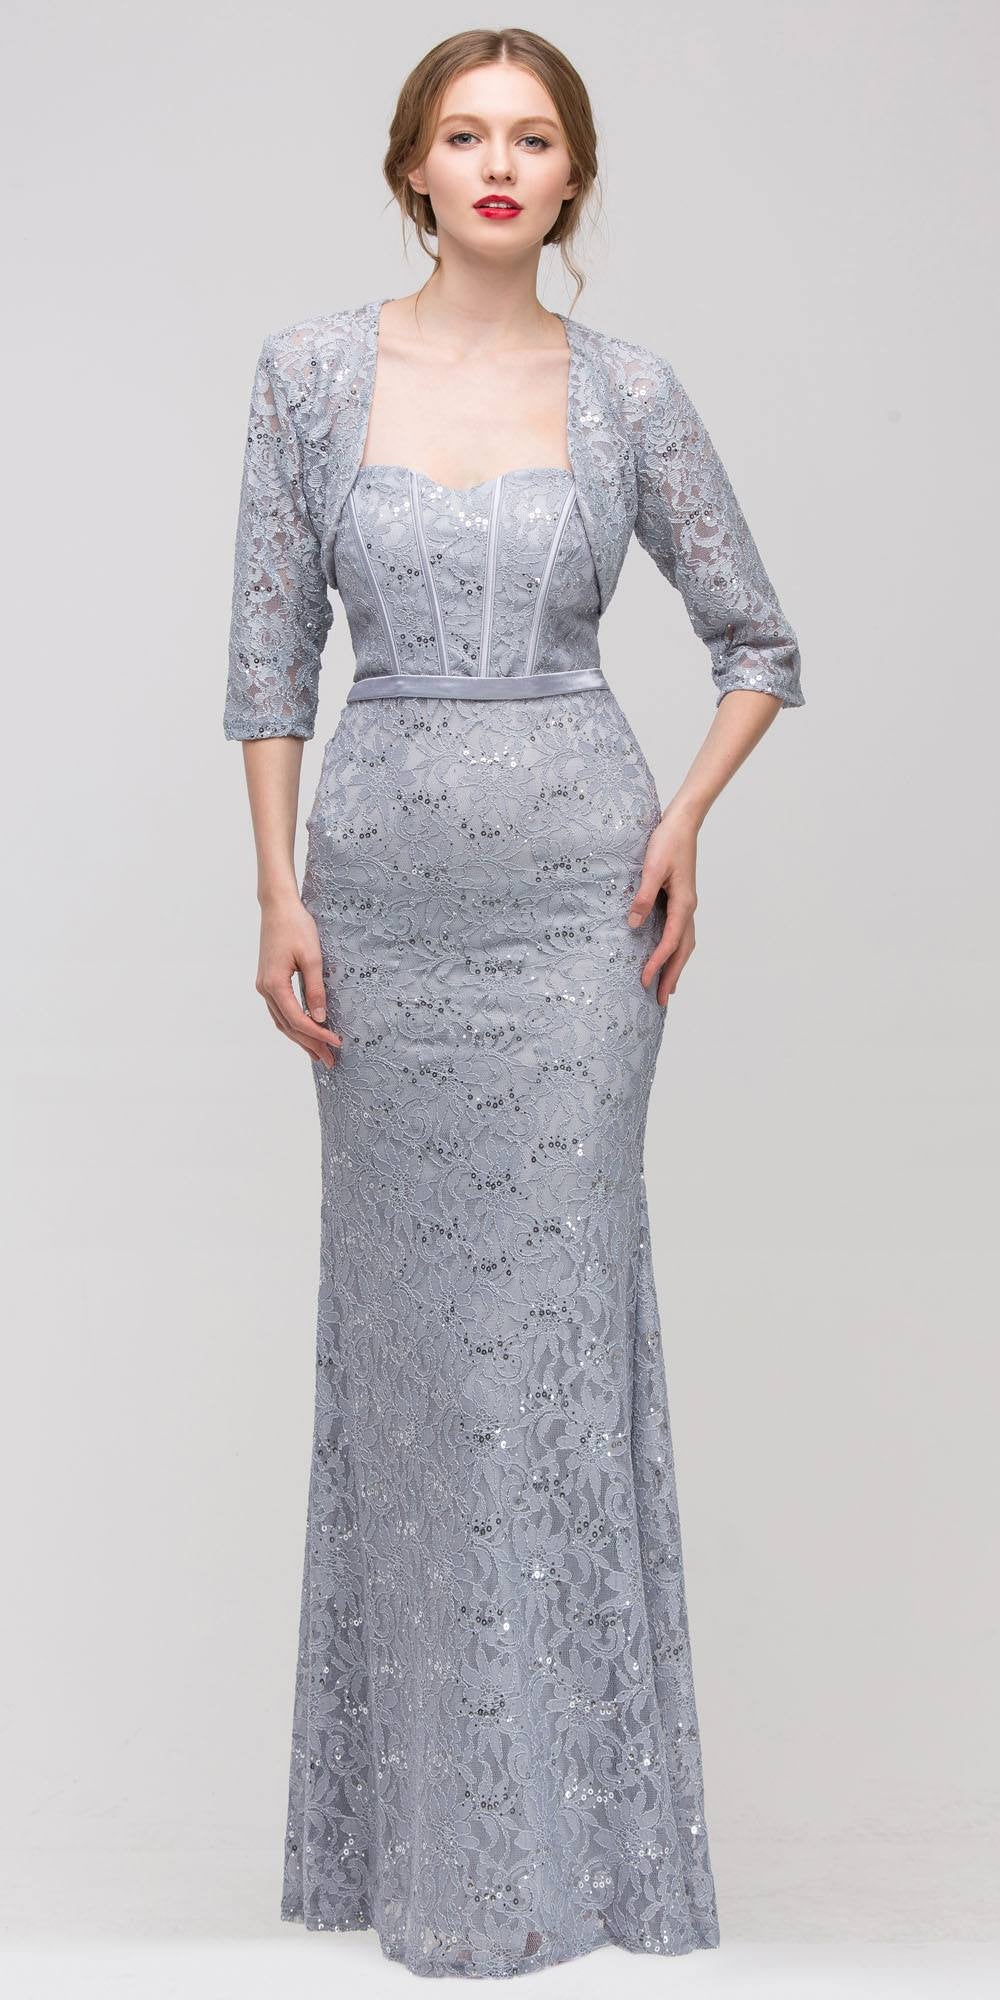 Long Lace Gown Silver Sheath Mermaid Flare Strapless Mid Sleeve Jacket